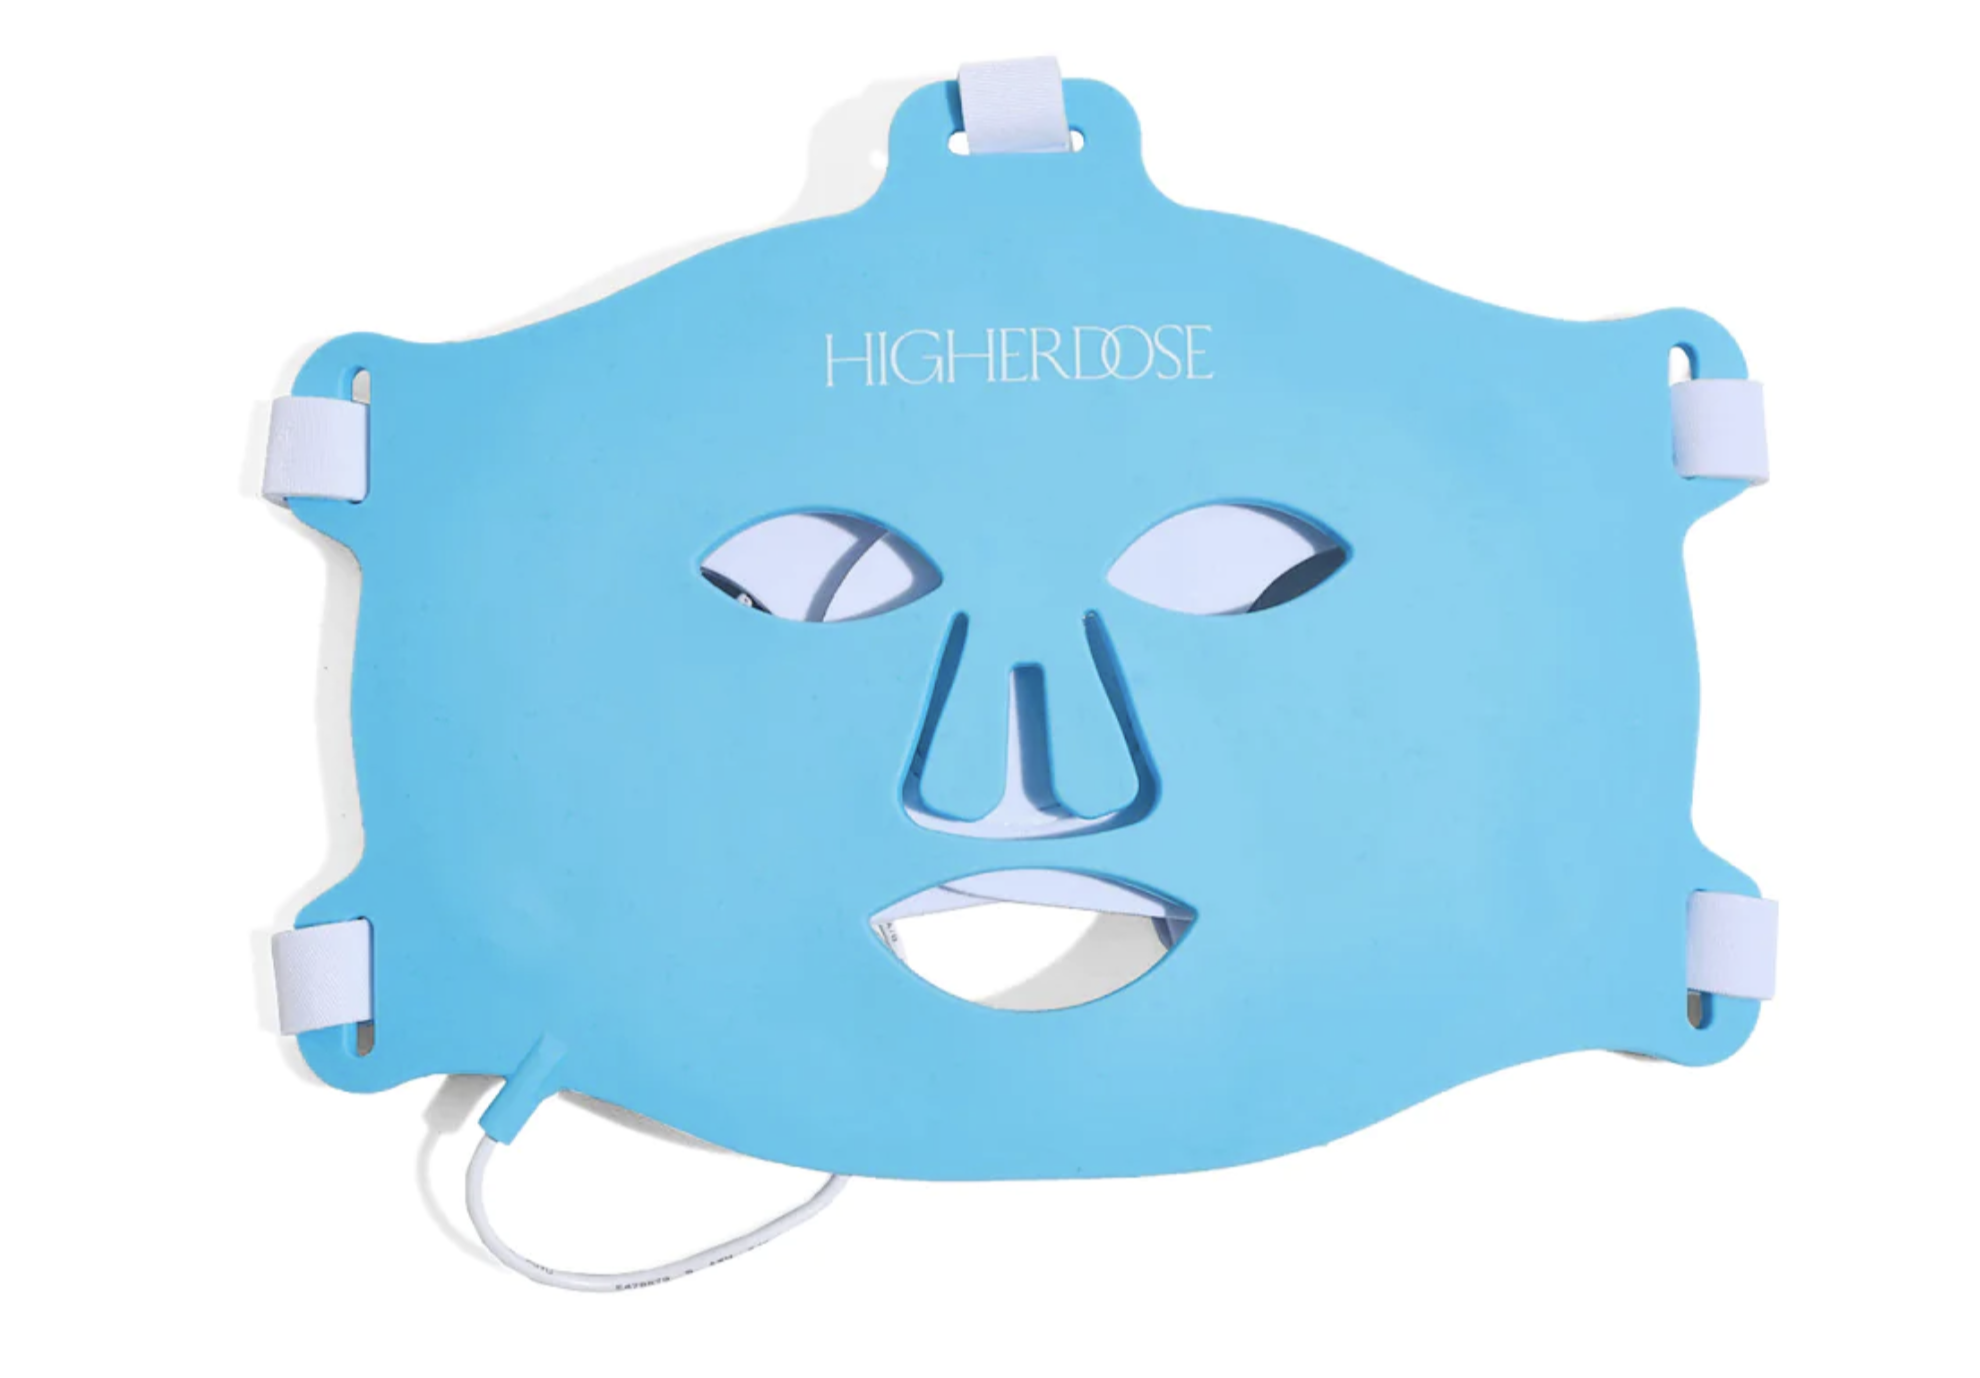 higherdose light therapy mask